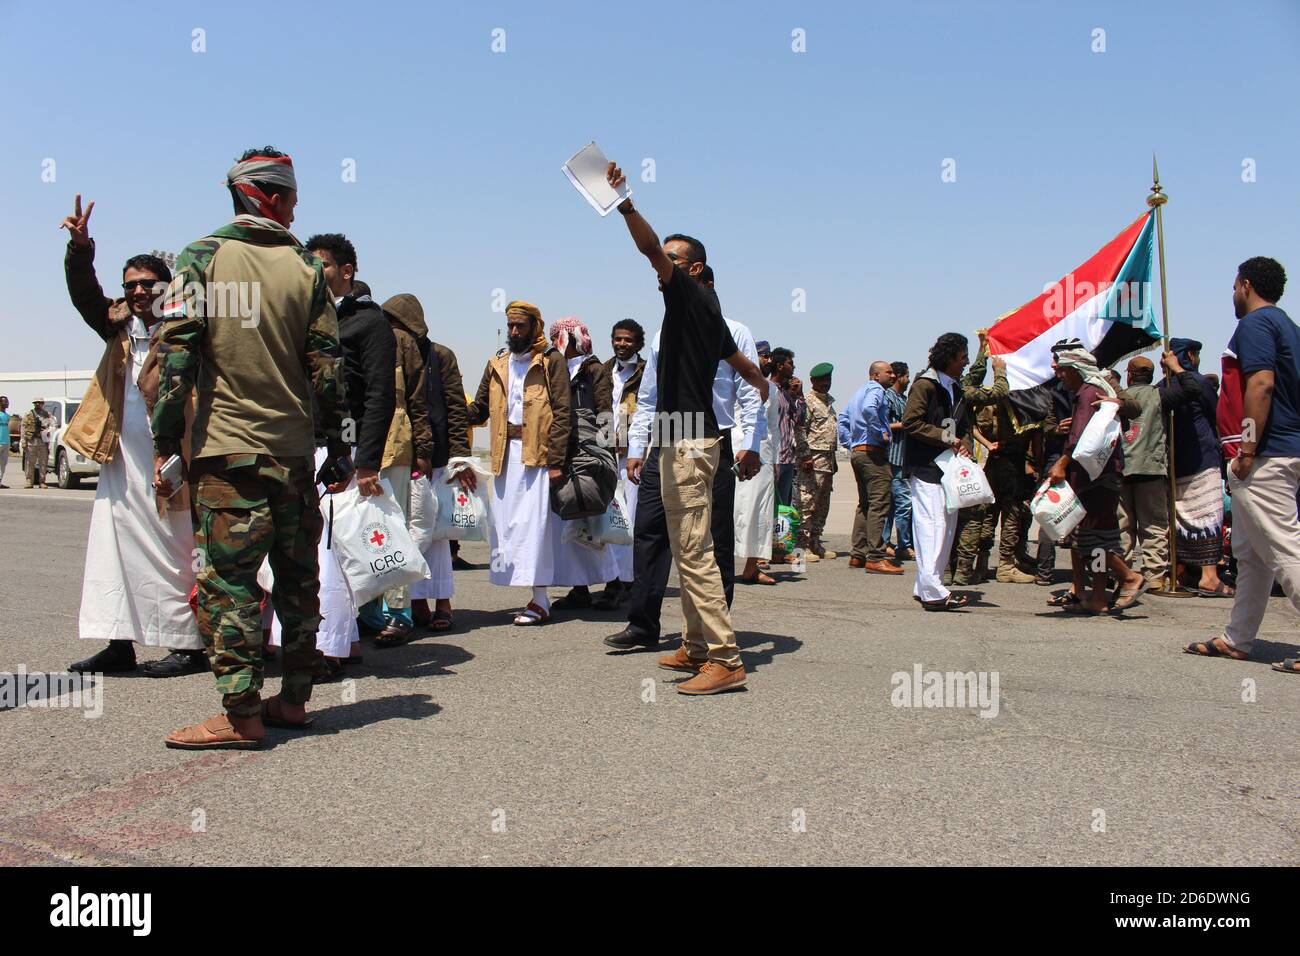 Aden, Yemen. 16th Oct, 2020. Yemeni prisoners who were held by Houthi are seen upon their arrival at an airport in the southern city of Aden, after being released on the second day of a prisoner swap between the Yemeni government and the Houthi movement. More than 1,000 people detained in relation to the conflict in Yemen are to be transported back to their region of origin or to their home countries by The International Committee of the Red Cross (ICRC) in the largest operation of its kind during the five-and-a-half-year war. Credit: Wail Shaif/dpa/Alamy Live News Stock Photo